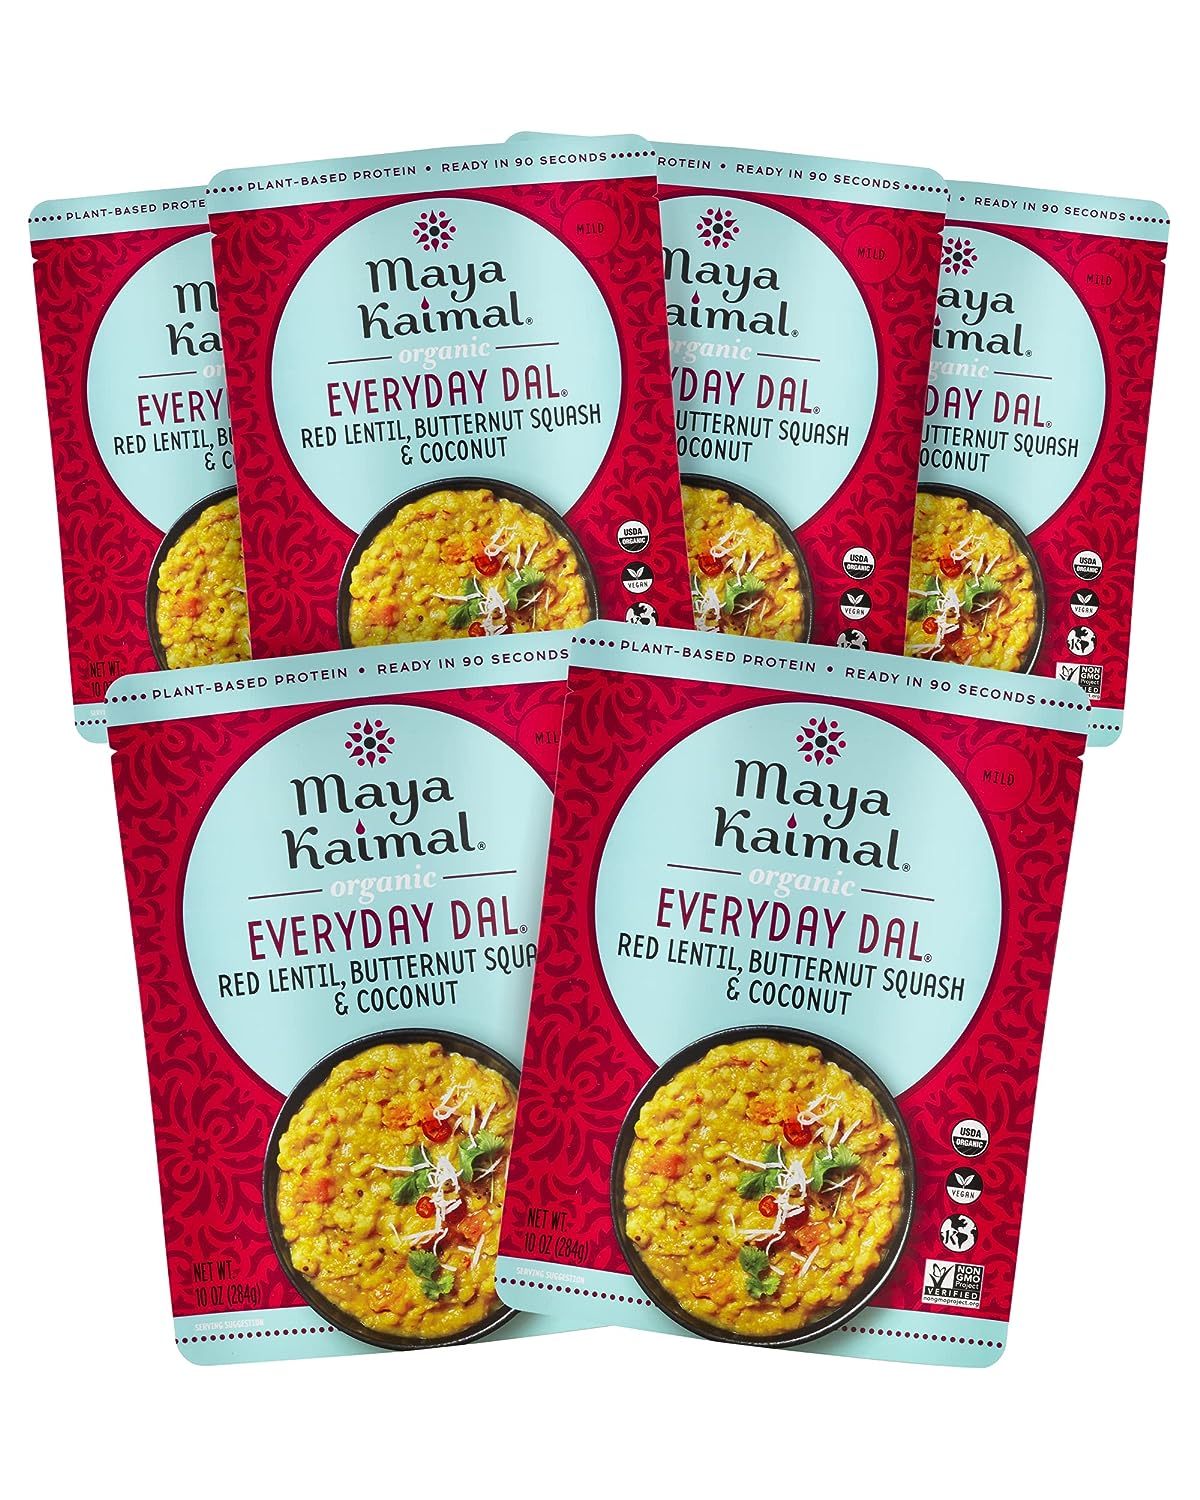 Maya Kaimal - Organic Indian Everyday Dal - Red Lentil 10oz - Fully Cooked with Butternut Squash and Coconut - Vegan - Microwavable - Ready to Eat Meals- Pack of 6